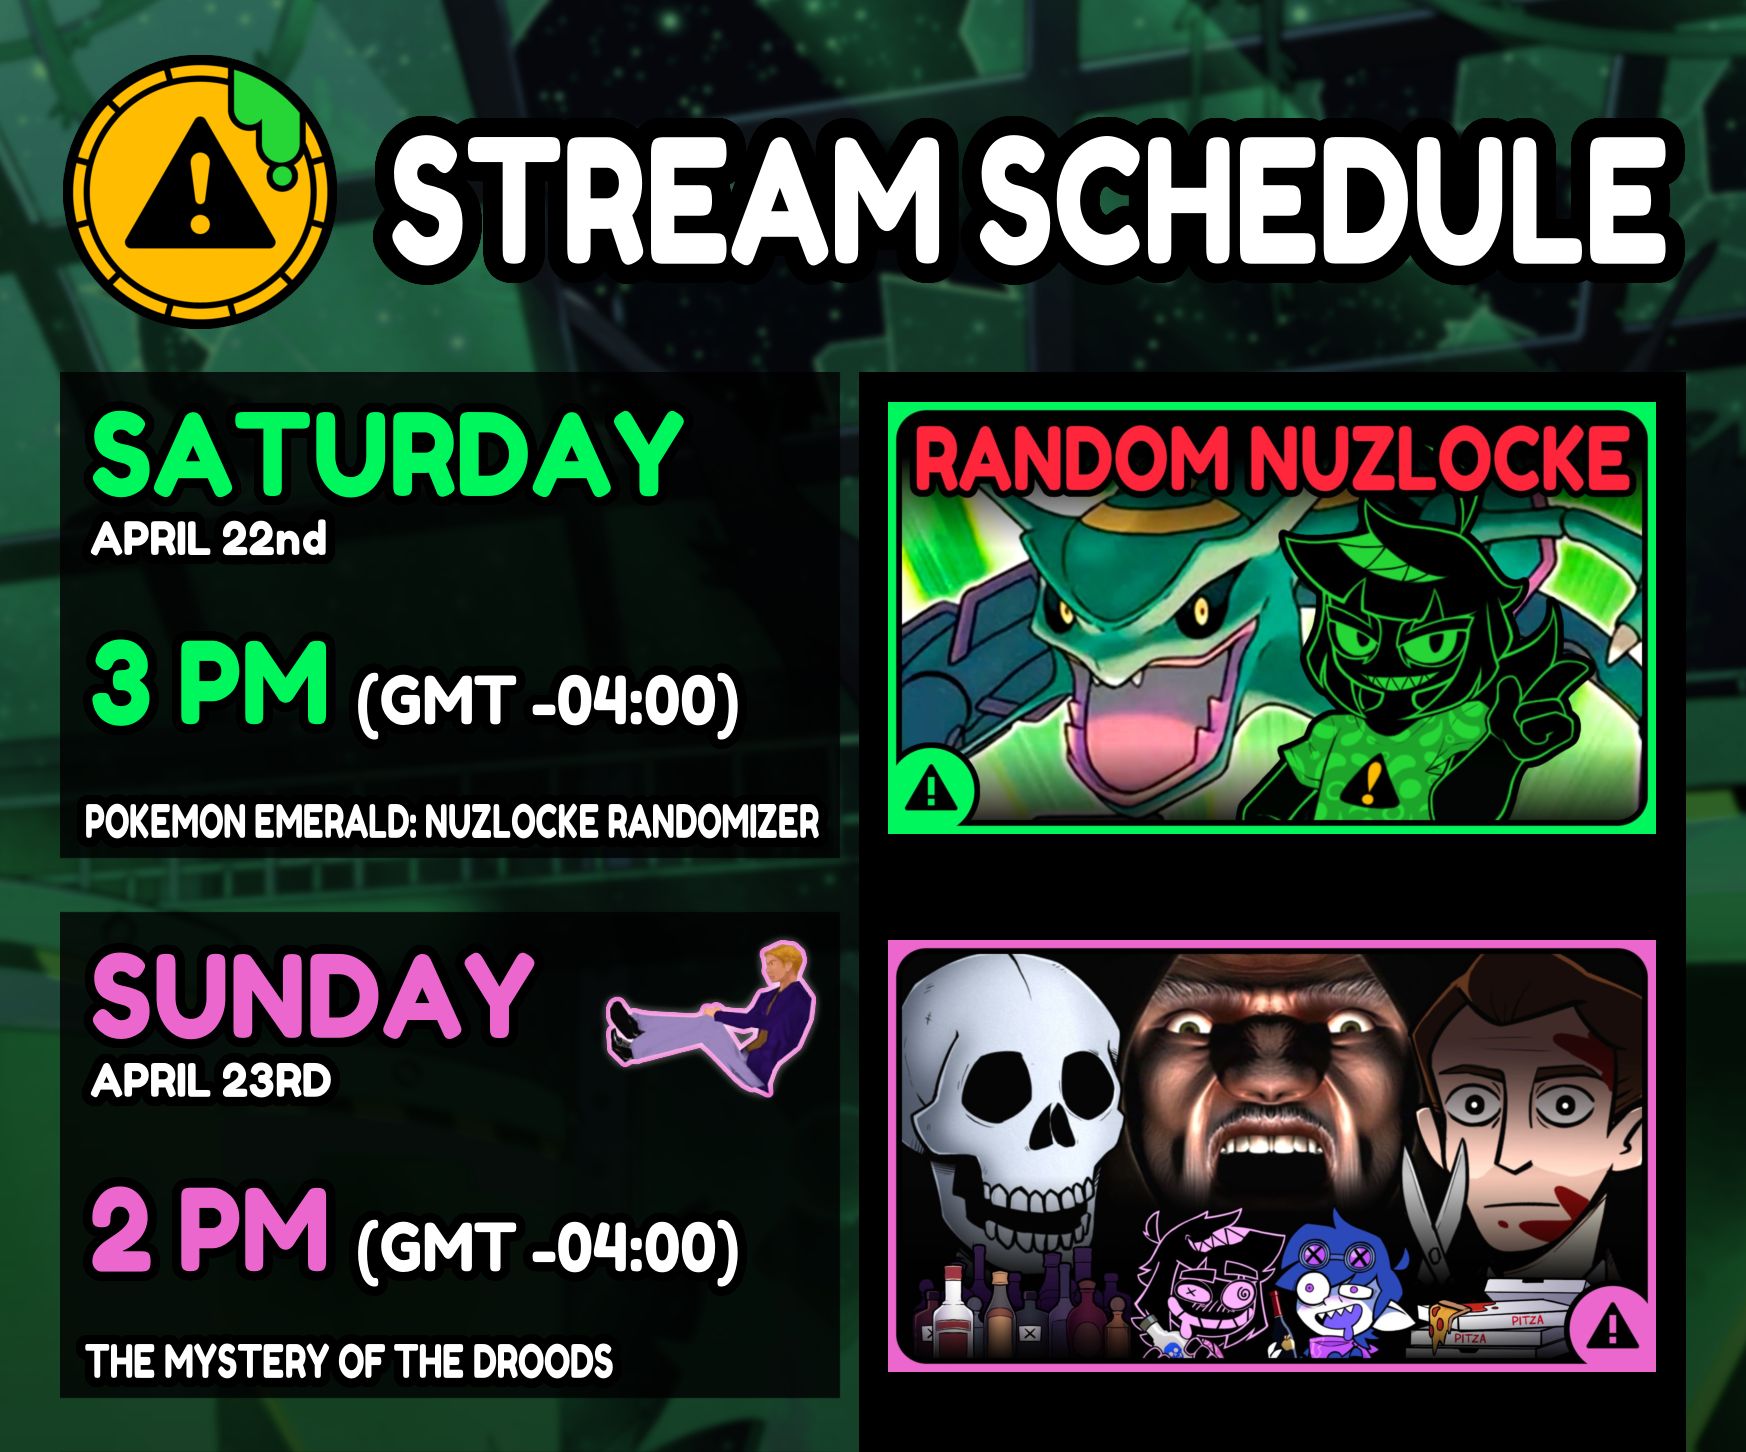 phisnom (CHECK PINNED!) 🧪⚠️ on X: 🗓️IT'S THE #PHISTREAM SCHEDULE! -  playing some Pokemon Emerald Randomizer, Nuzlocke Edition w/ @cacozone on  Saturday. - THE MYSTERY OF THE DRUIDS DRINKING STREAM W/ @StupidButterfIy